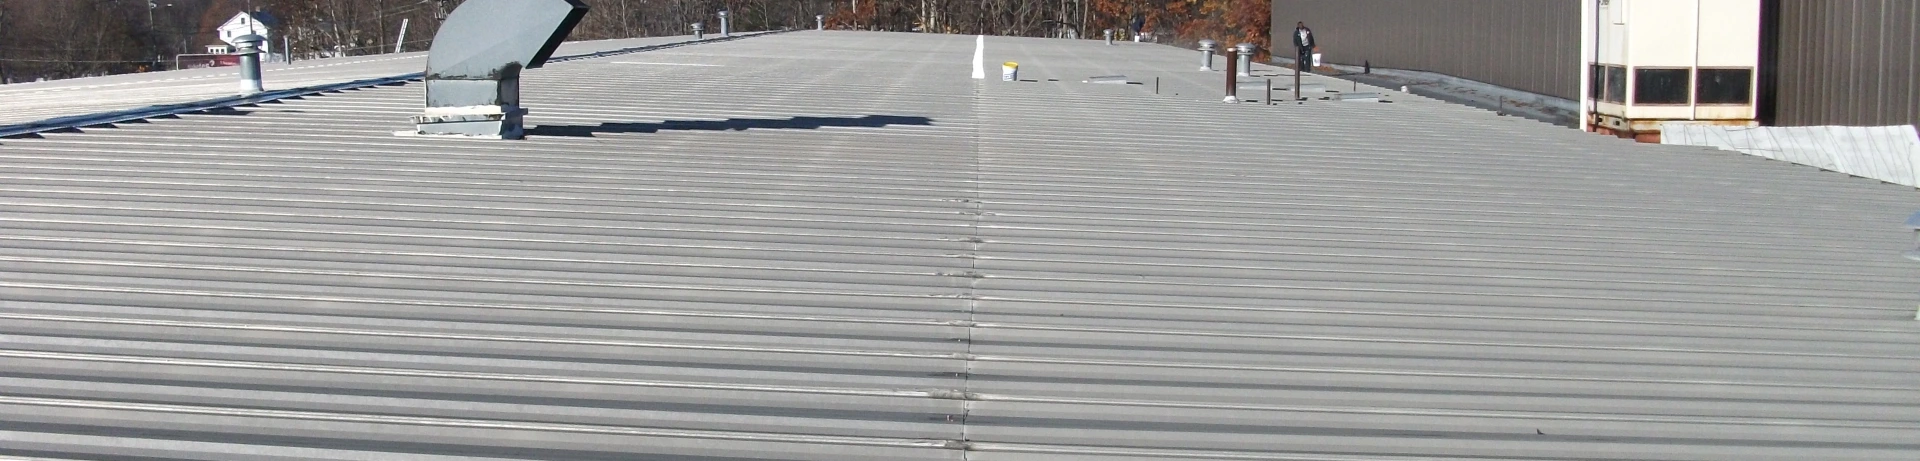 Rooftop view of a commercial metal roof installation in Pittsfield, MA.